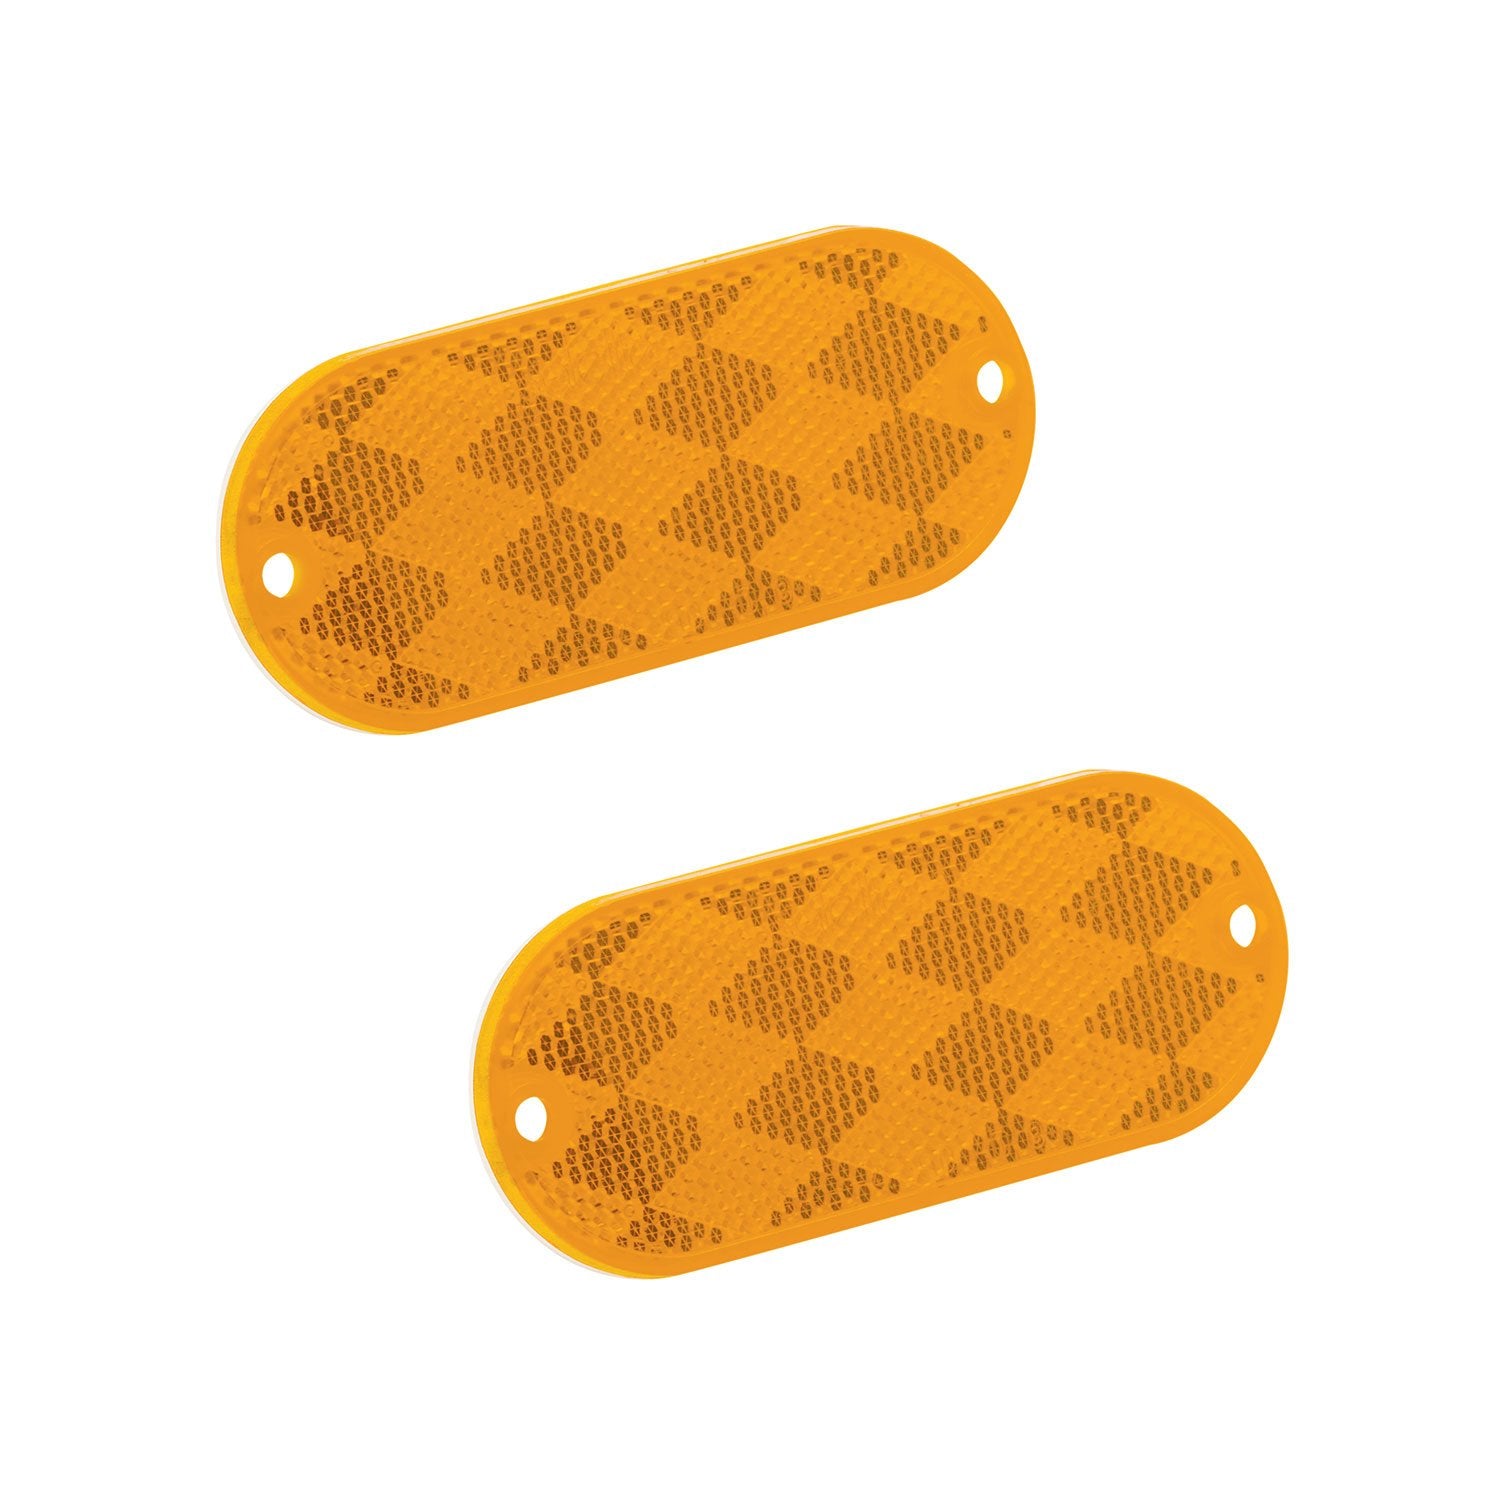 Bargman 71-78-020 Reflector (Class A Oblong Amber with Mounting Holes and Adhesive Back), 2 Pack